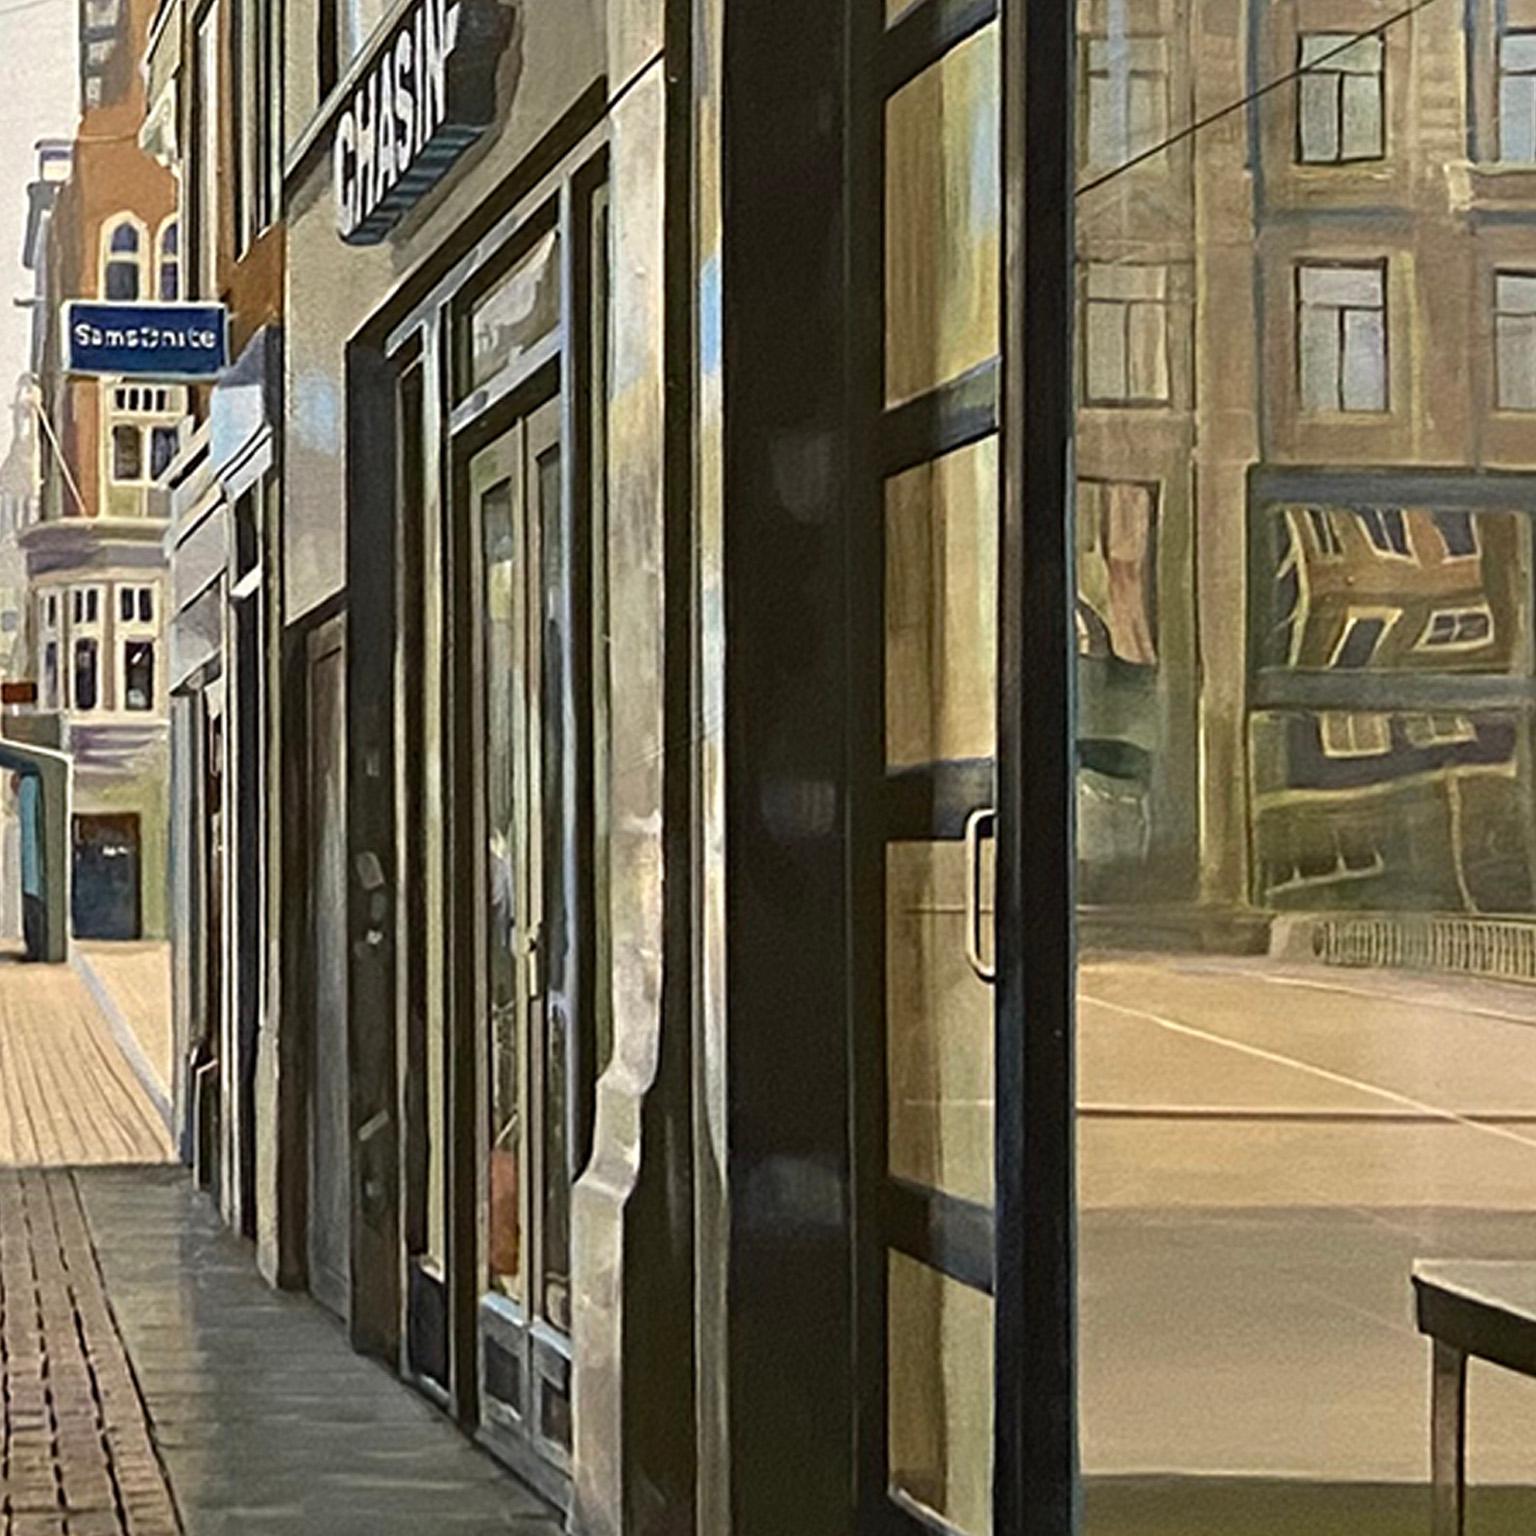 Contemporary Hyper Realist Cityscape: Leidsegracht-Keizersgracht (Amsterdam)

Eric Tiggeler paints cityscapes in a (hyper) realis-tic way. He does not opt for picturesque scenes, preferring to paint the ordinary city: houses, streets, cars, facades,